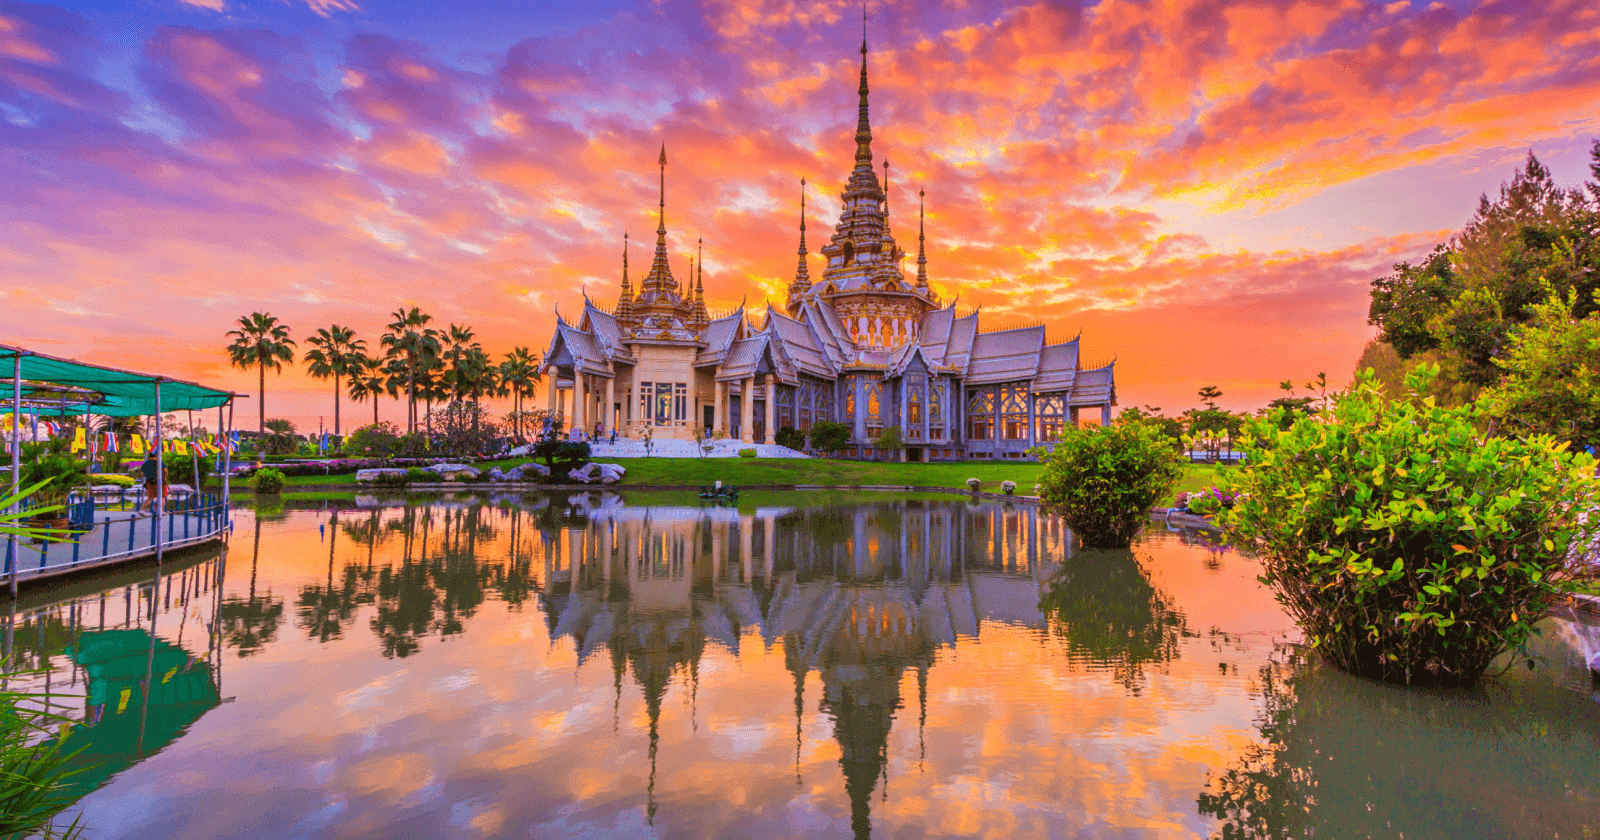 Explore the Top 12 Places to Visit in Thailand Today